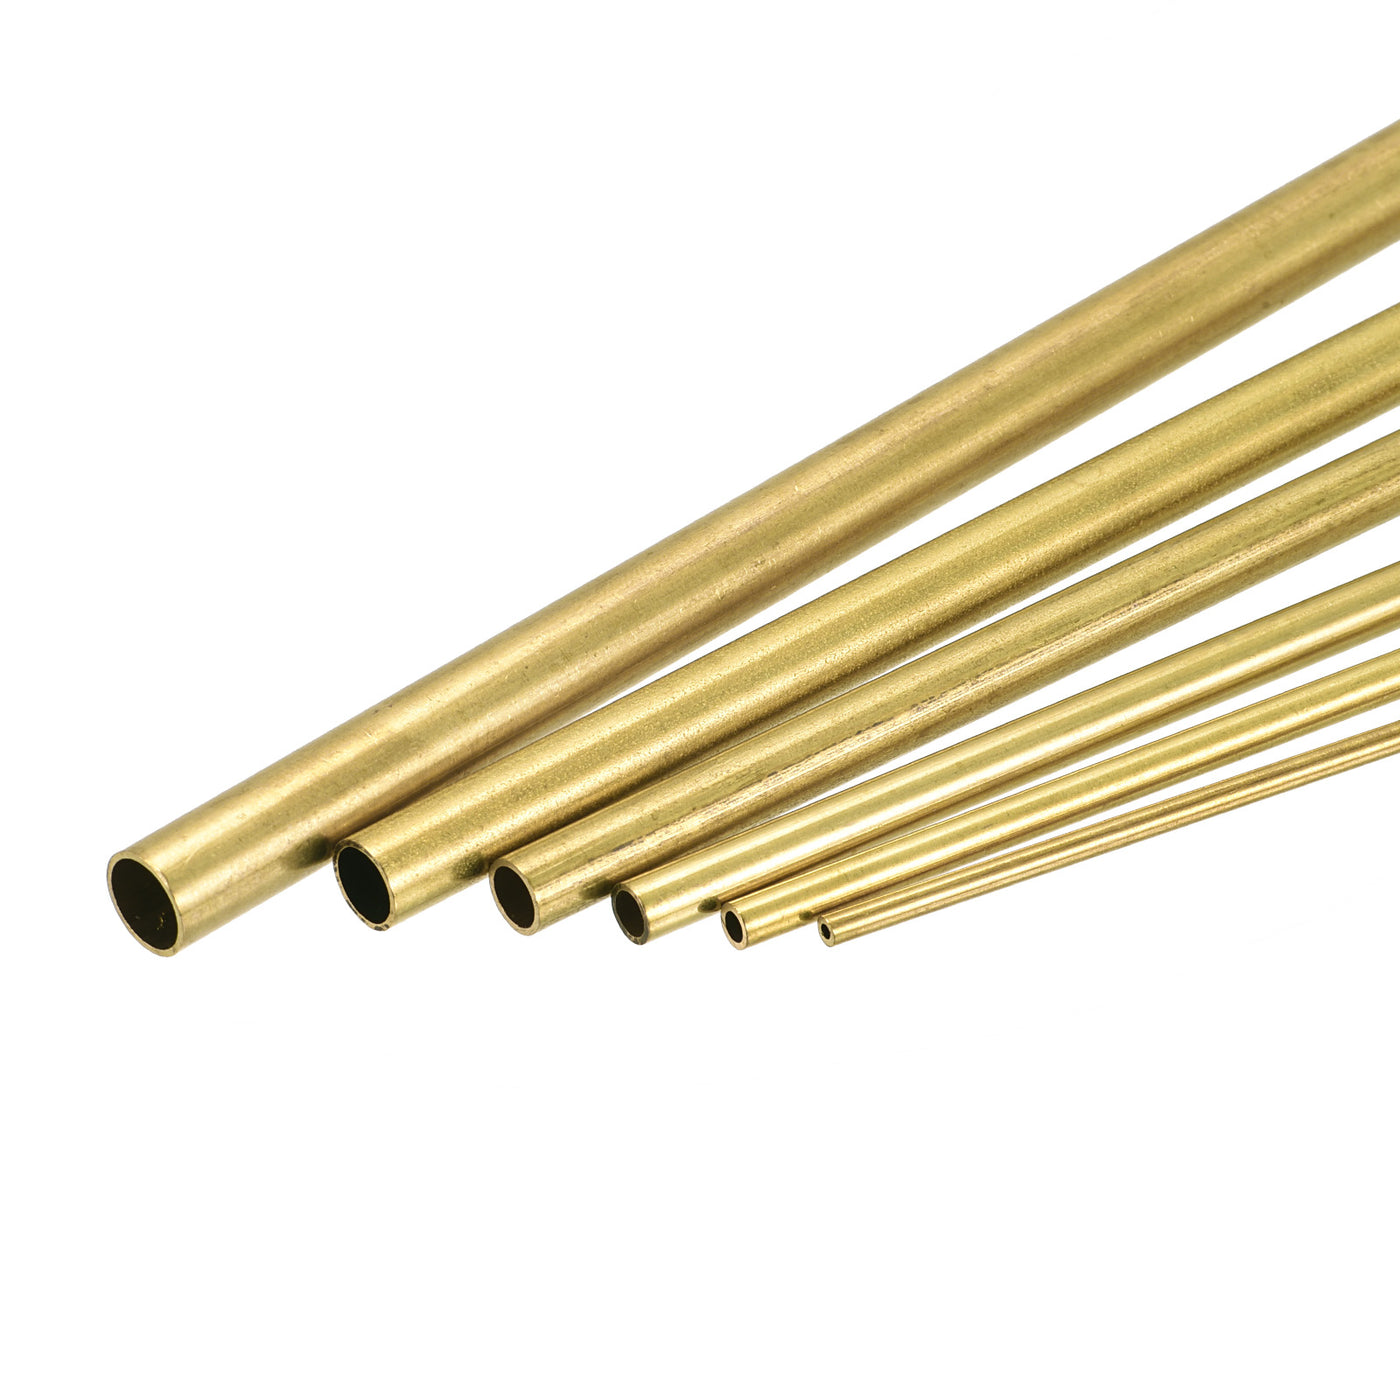 uxcell Uxcell Brass Tube, 1.5mm 2.5mm 3.5mm 4.5mm 5.5mm 6.5mm OD x 0.2mm Wall Thickness 300mm Length Metal Tubing, Pack of 6